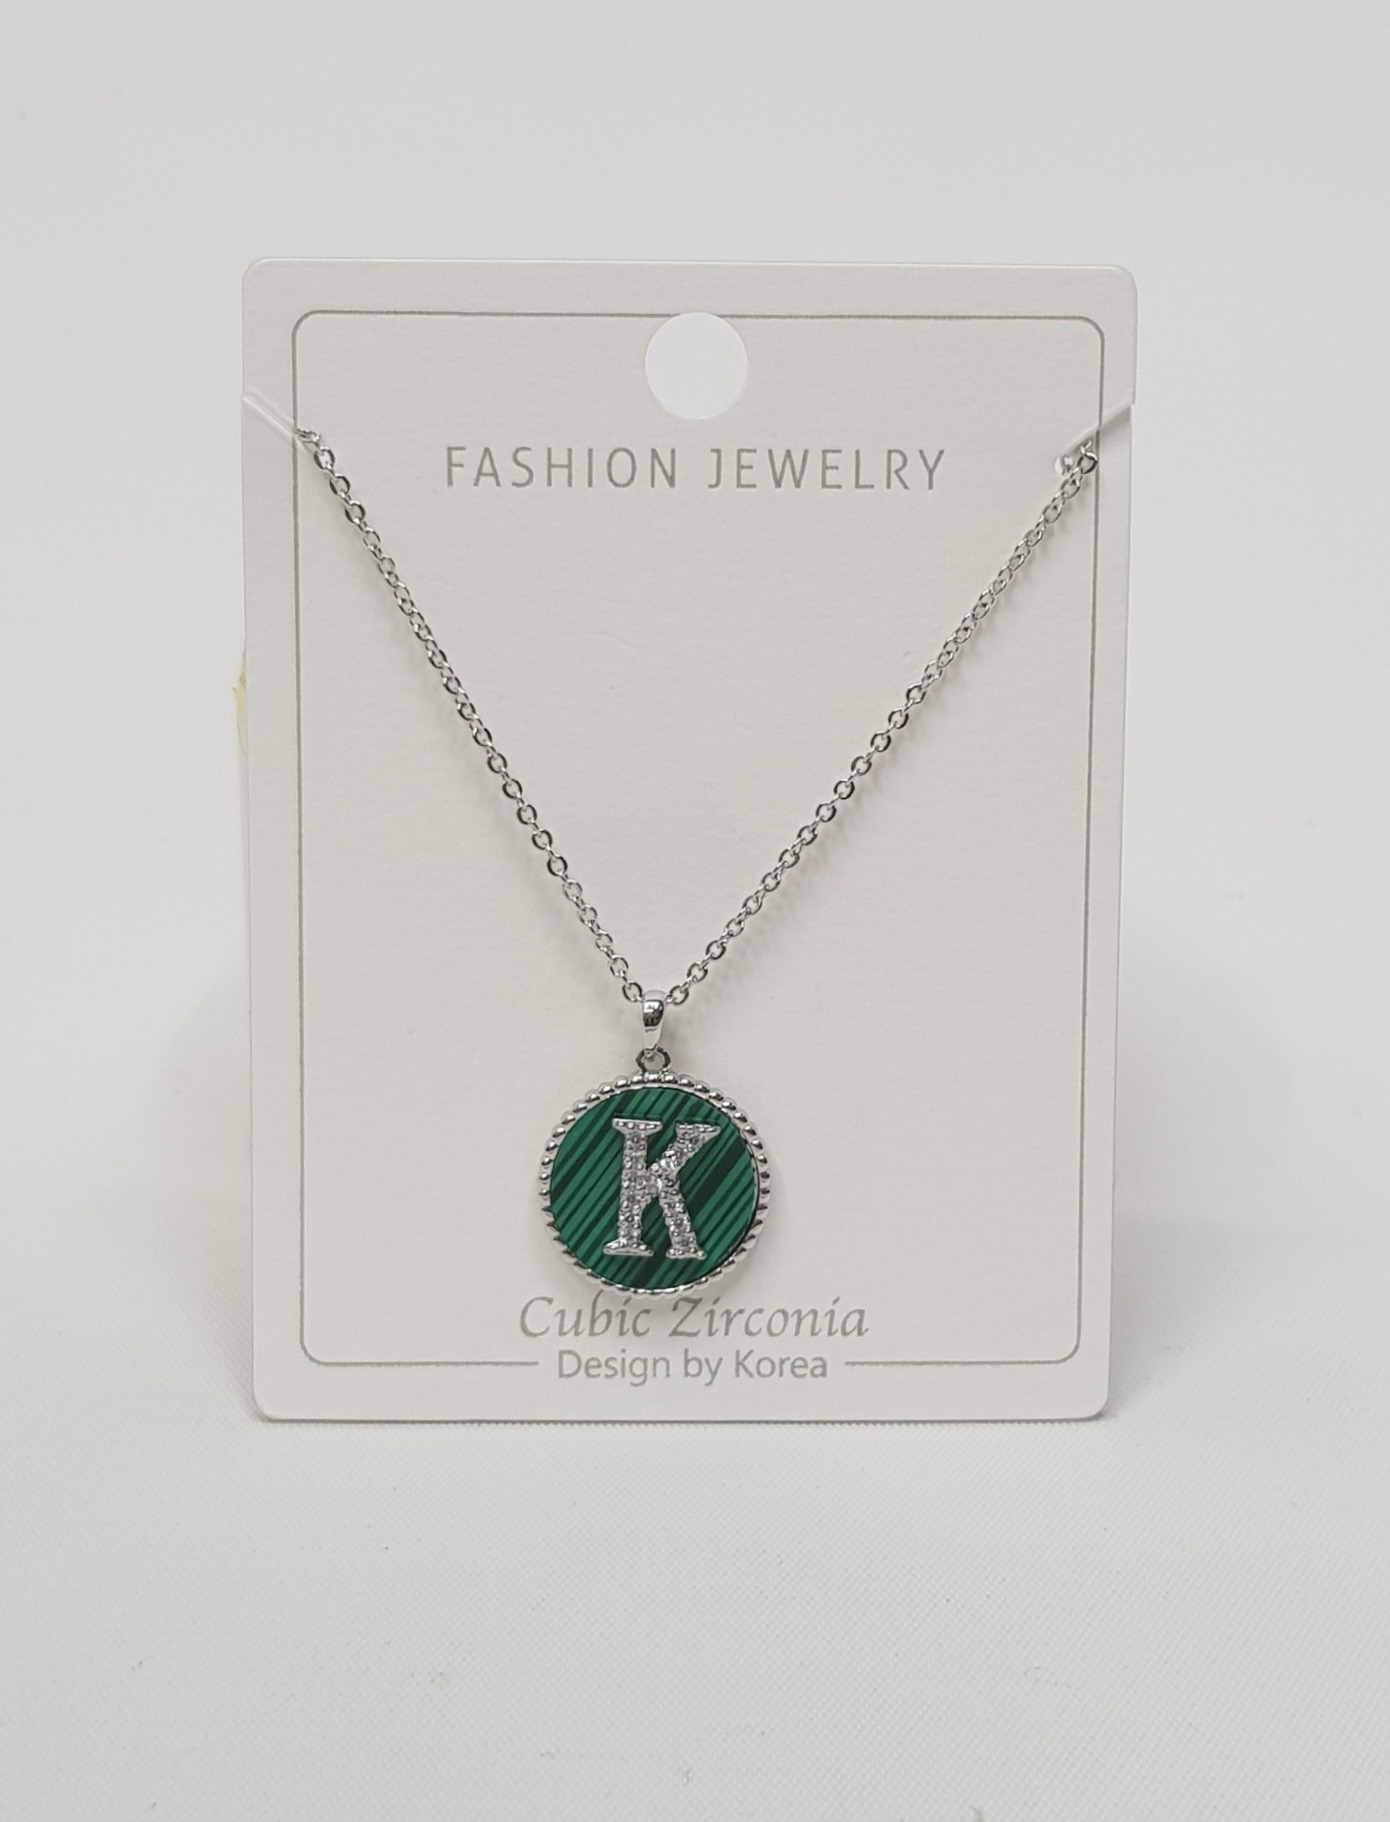 Initial Letter Necklace K